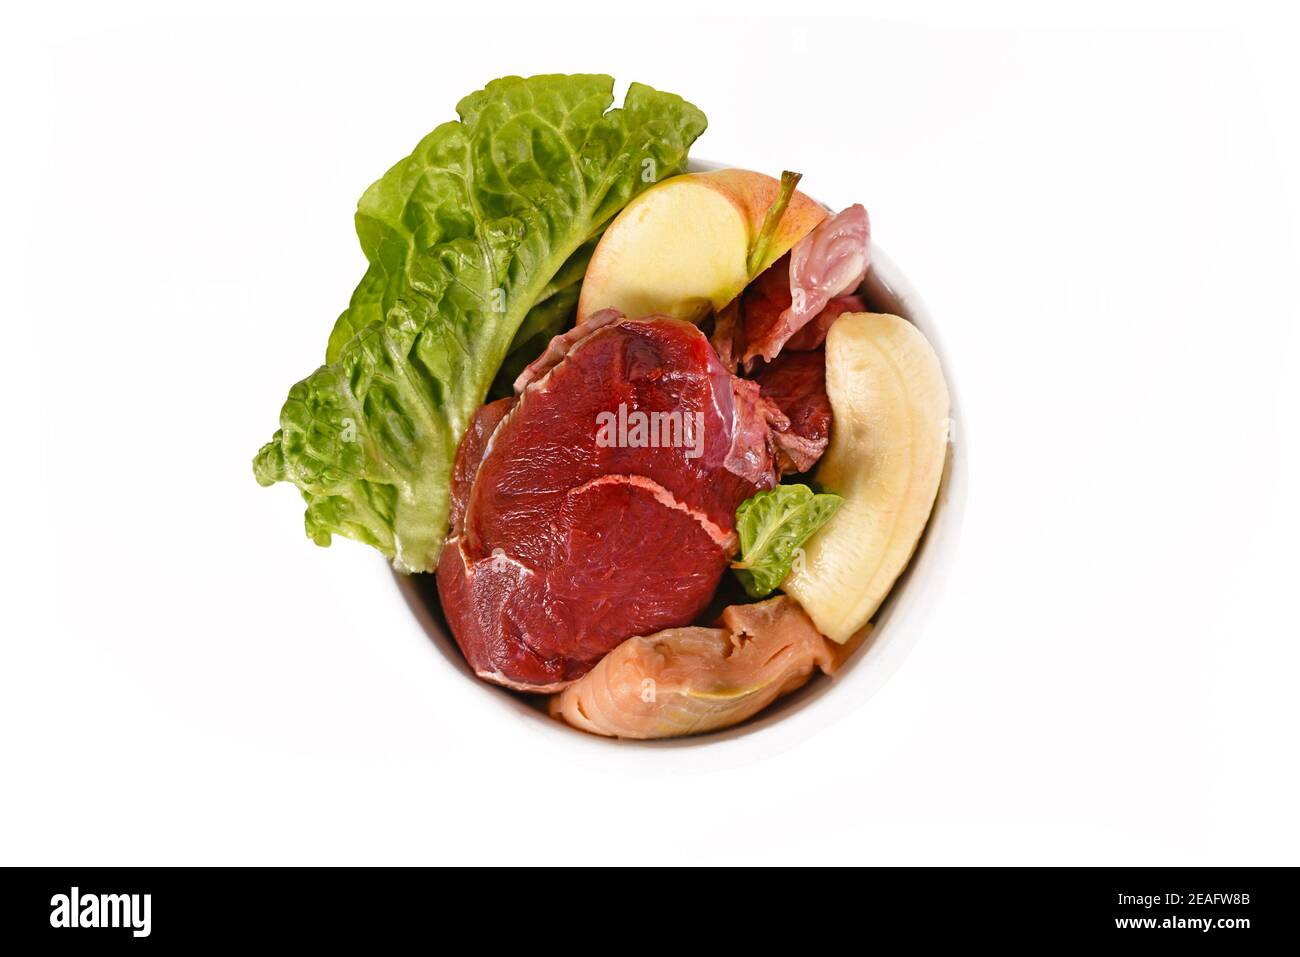 Top view of Dog bowl with mixture of biologically appropriate raw food containing meat chunks, fish, fruits and vegetables isolated on white backgroun Stock Photo